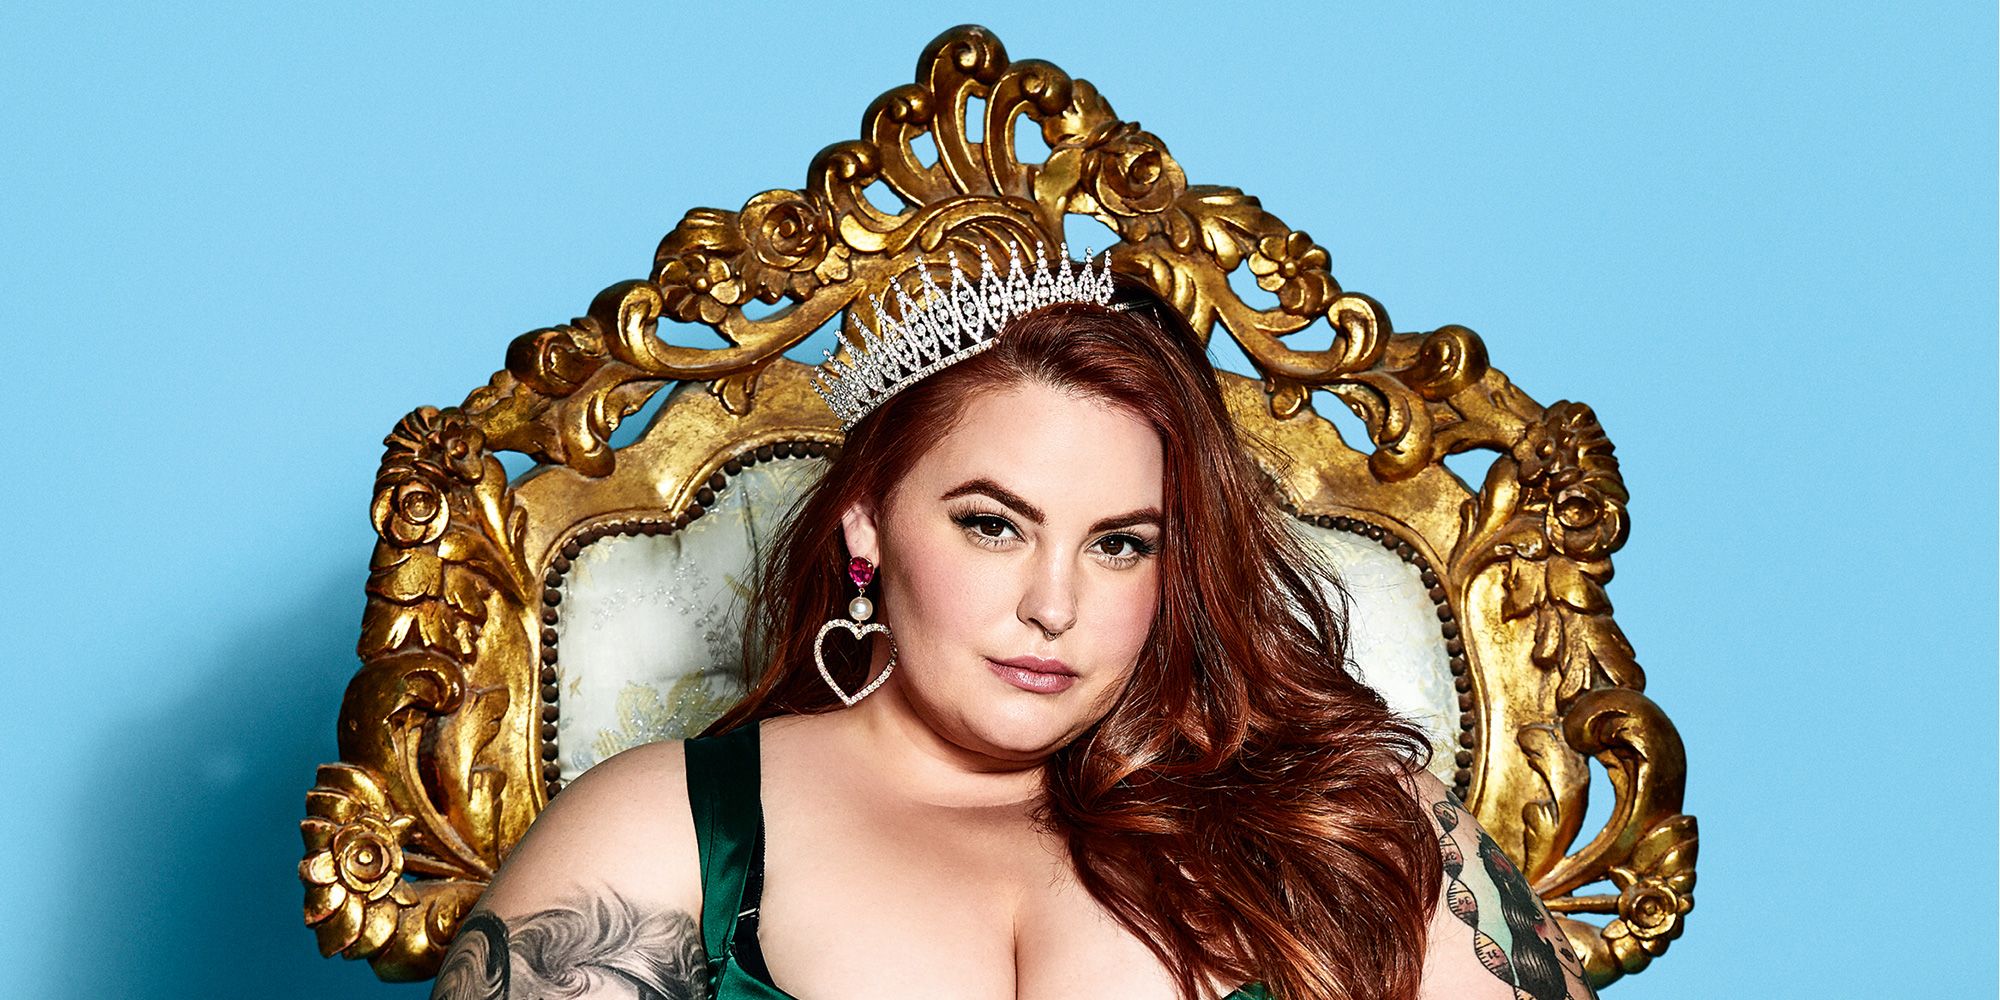 I wish I could just disappear: Tess Holliday on dealing with